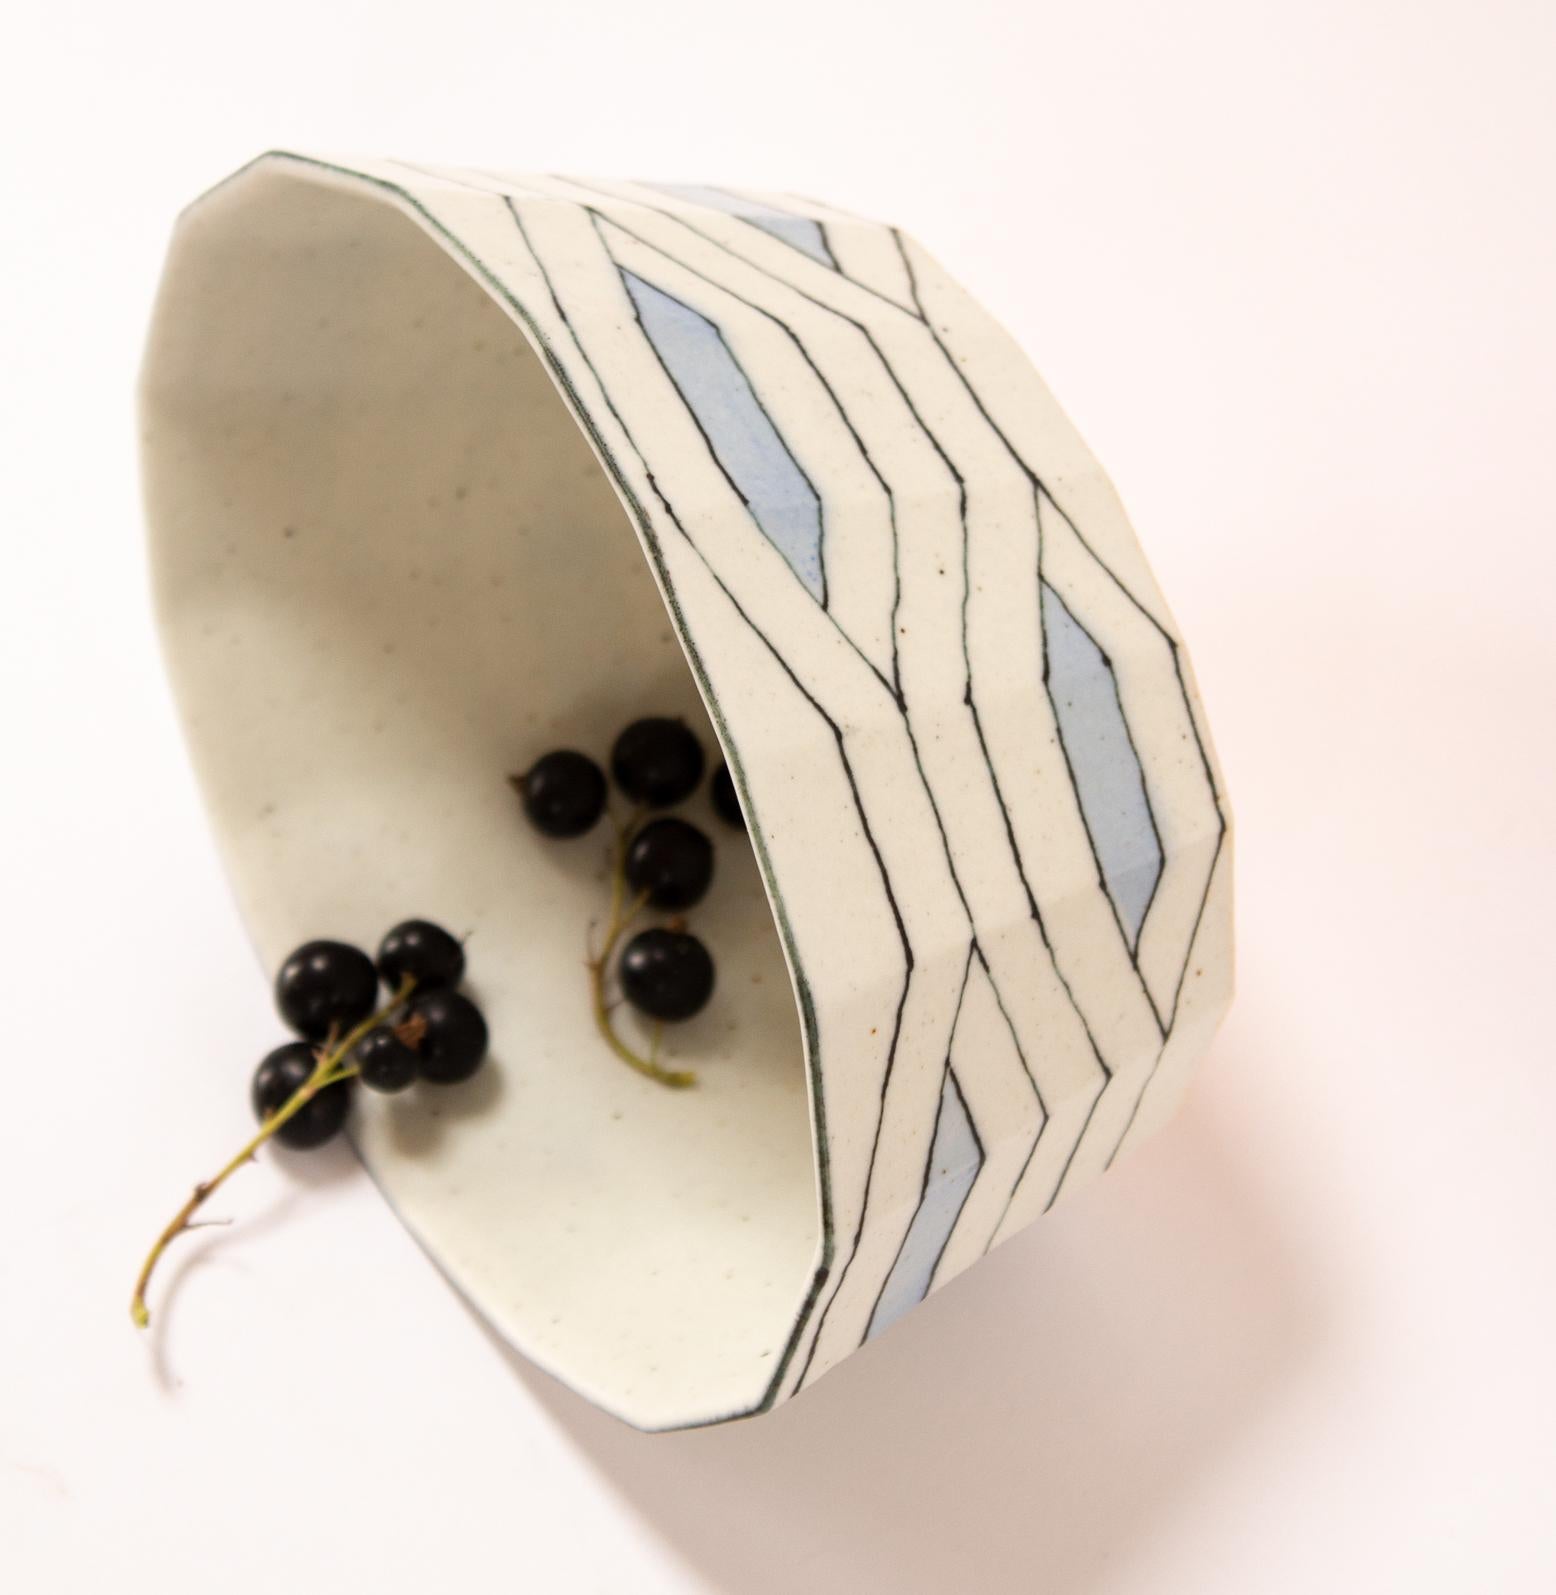 Hand-Crafted Blue, Black and Eggshell Ceramic Vessel by Bodil Manz, Signed by the Artist